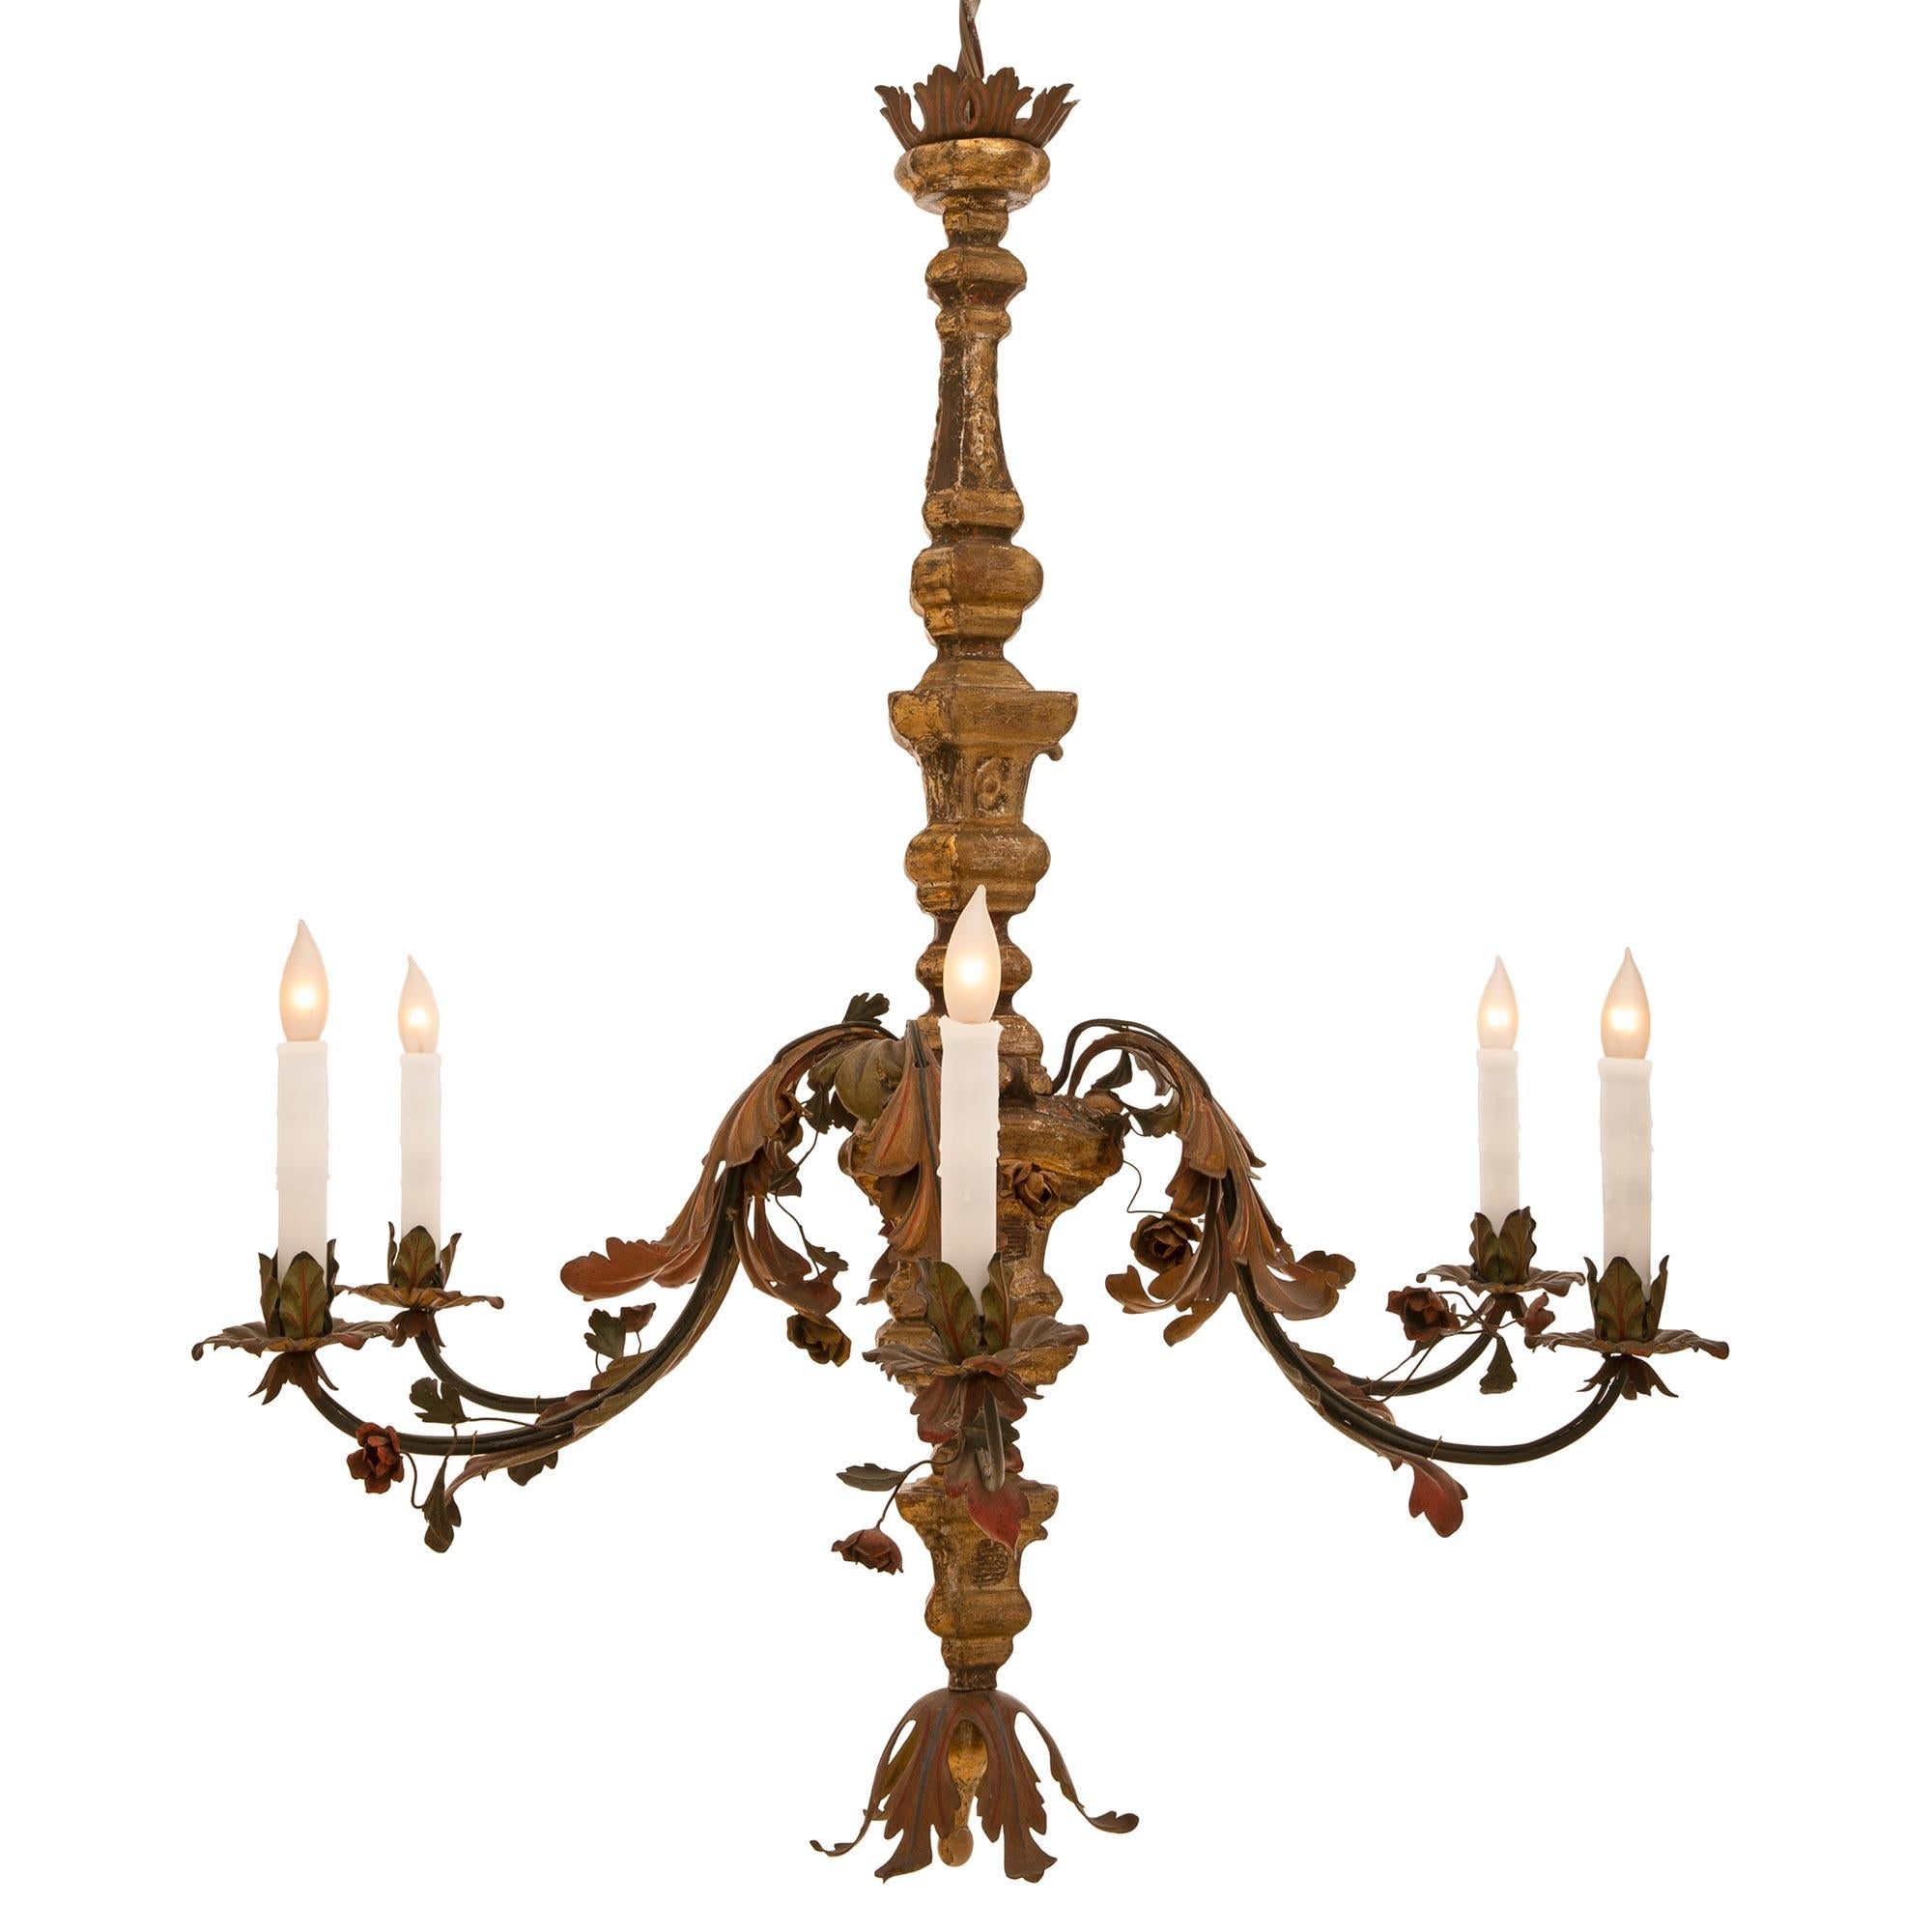 A charming Italian early 19th century mecca and hand painted green and red pressed metal chandelier. The six light chandelier has an unusual triangular shaped fut with an acanthus leaves finial. The fut is centered by six 'S' scrolled metal arms in